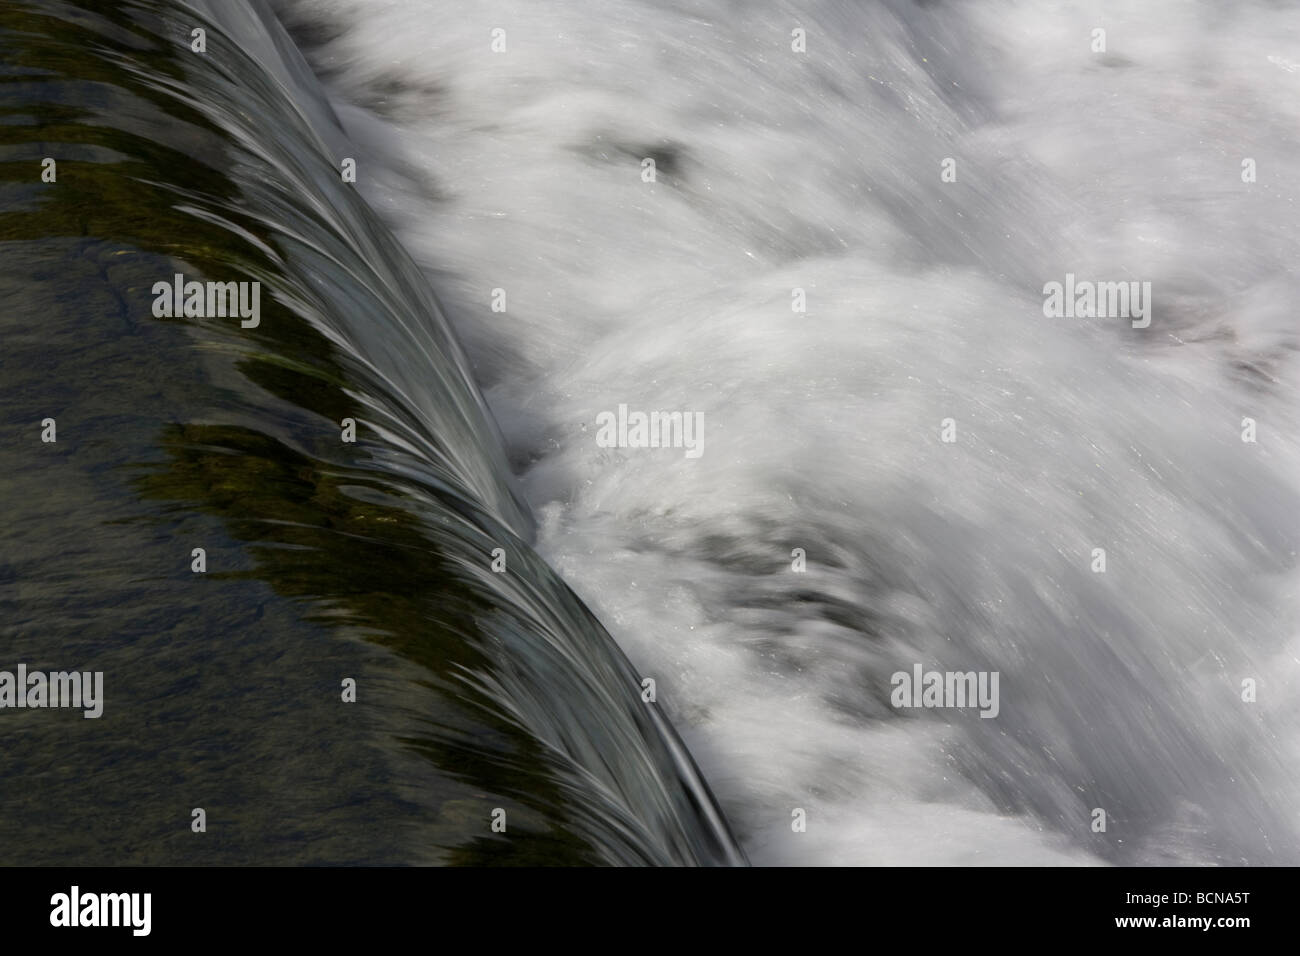 Clear, calm water becomes a mass of white as it cascades over a weir at Lods, Stock Photo